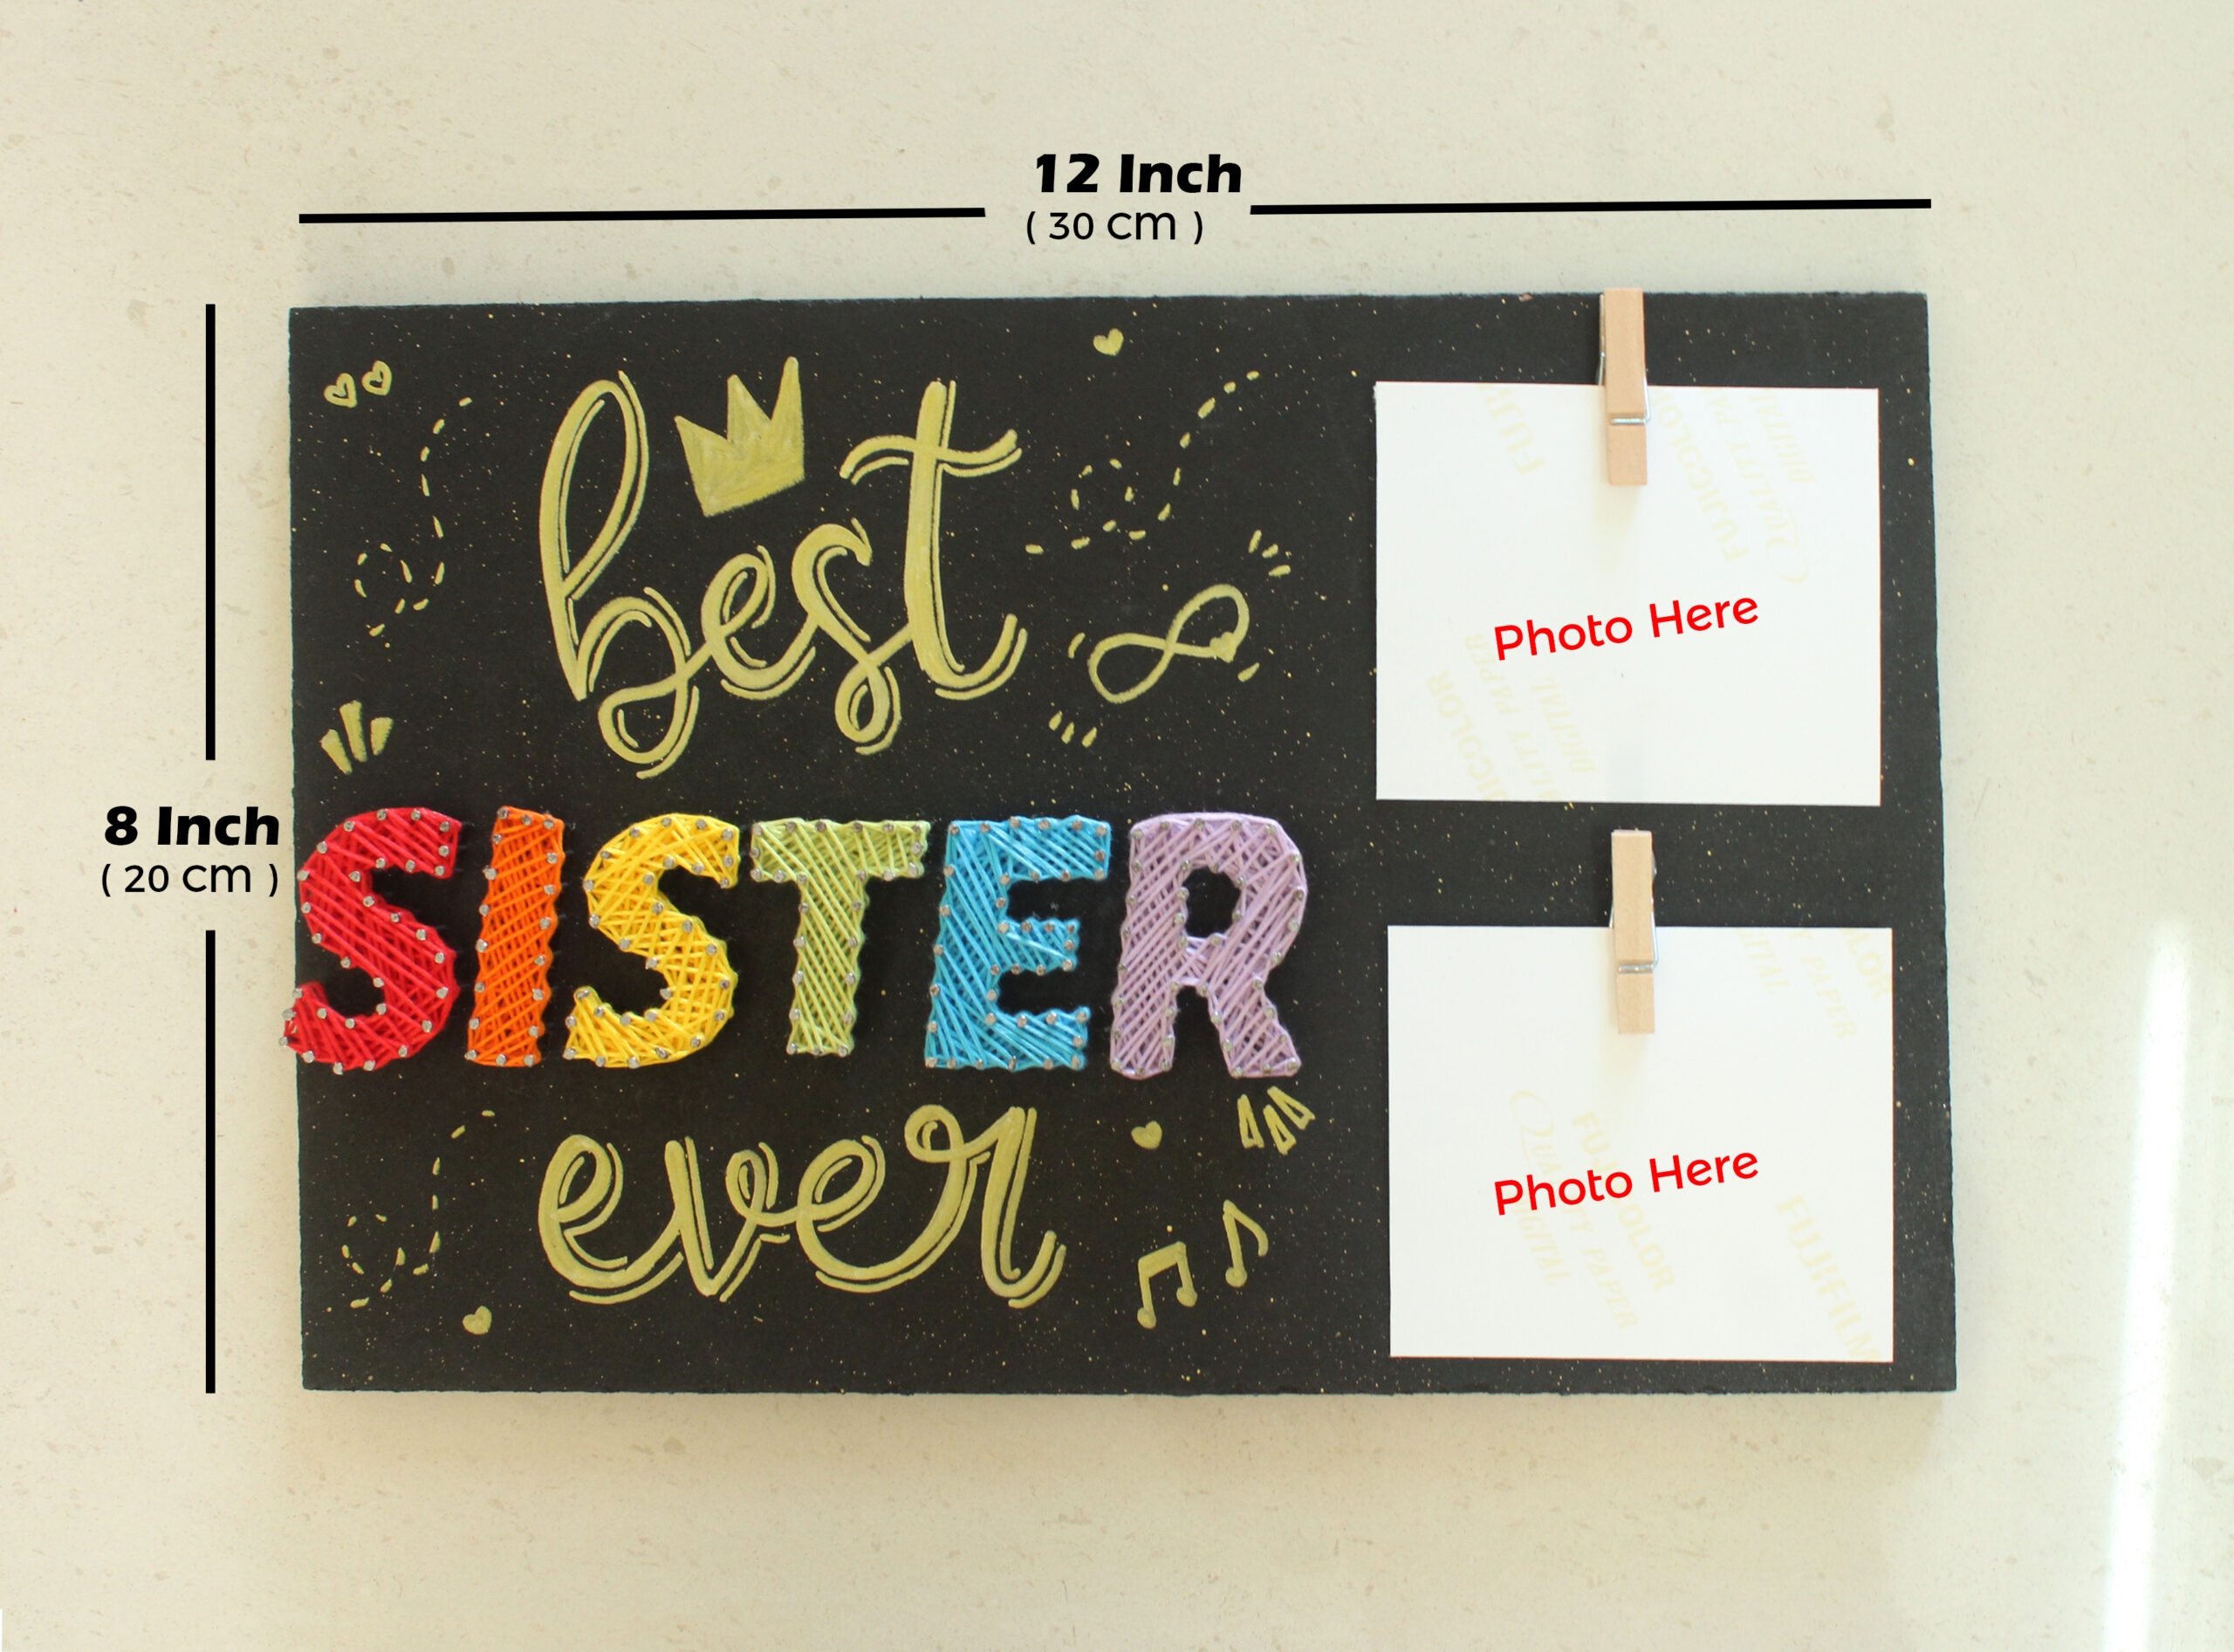 Personalized Birthday Gifts for Sister - Famvibe